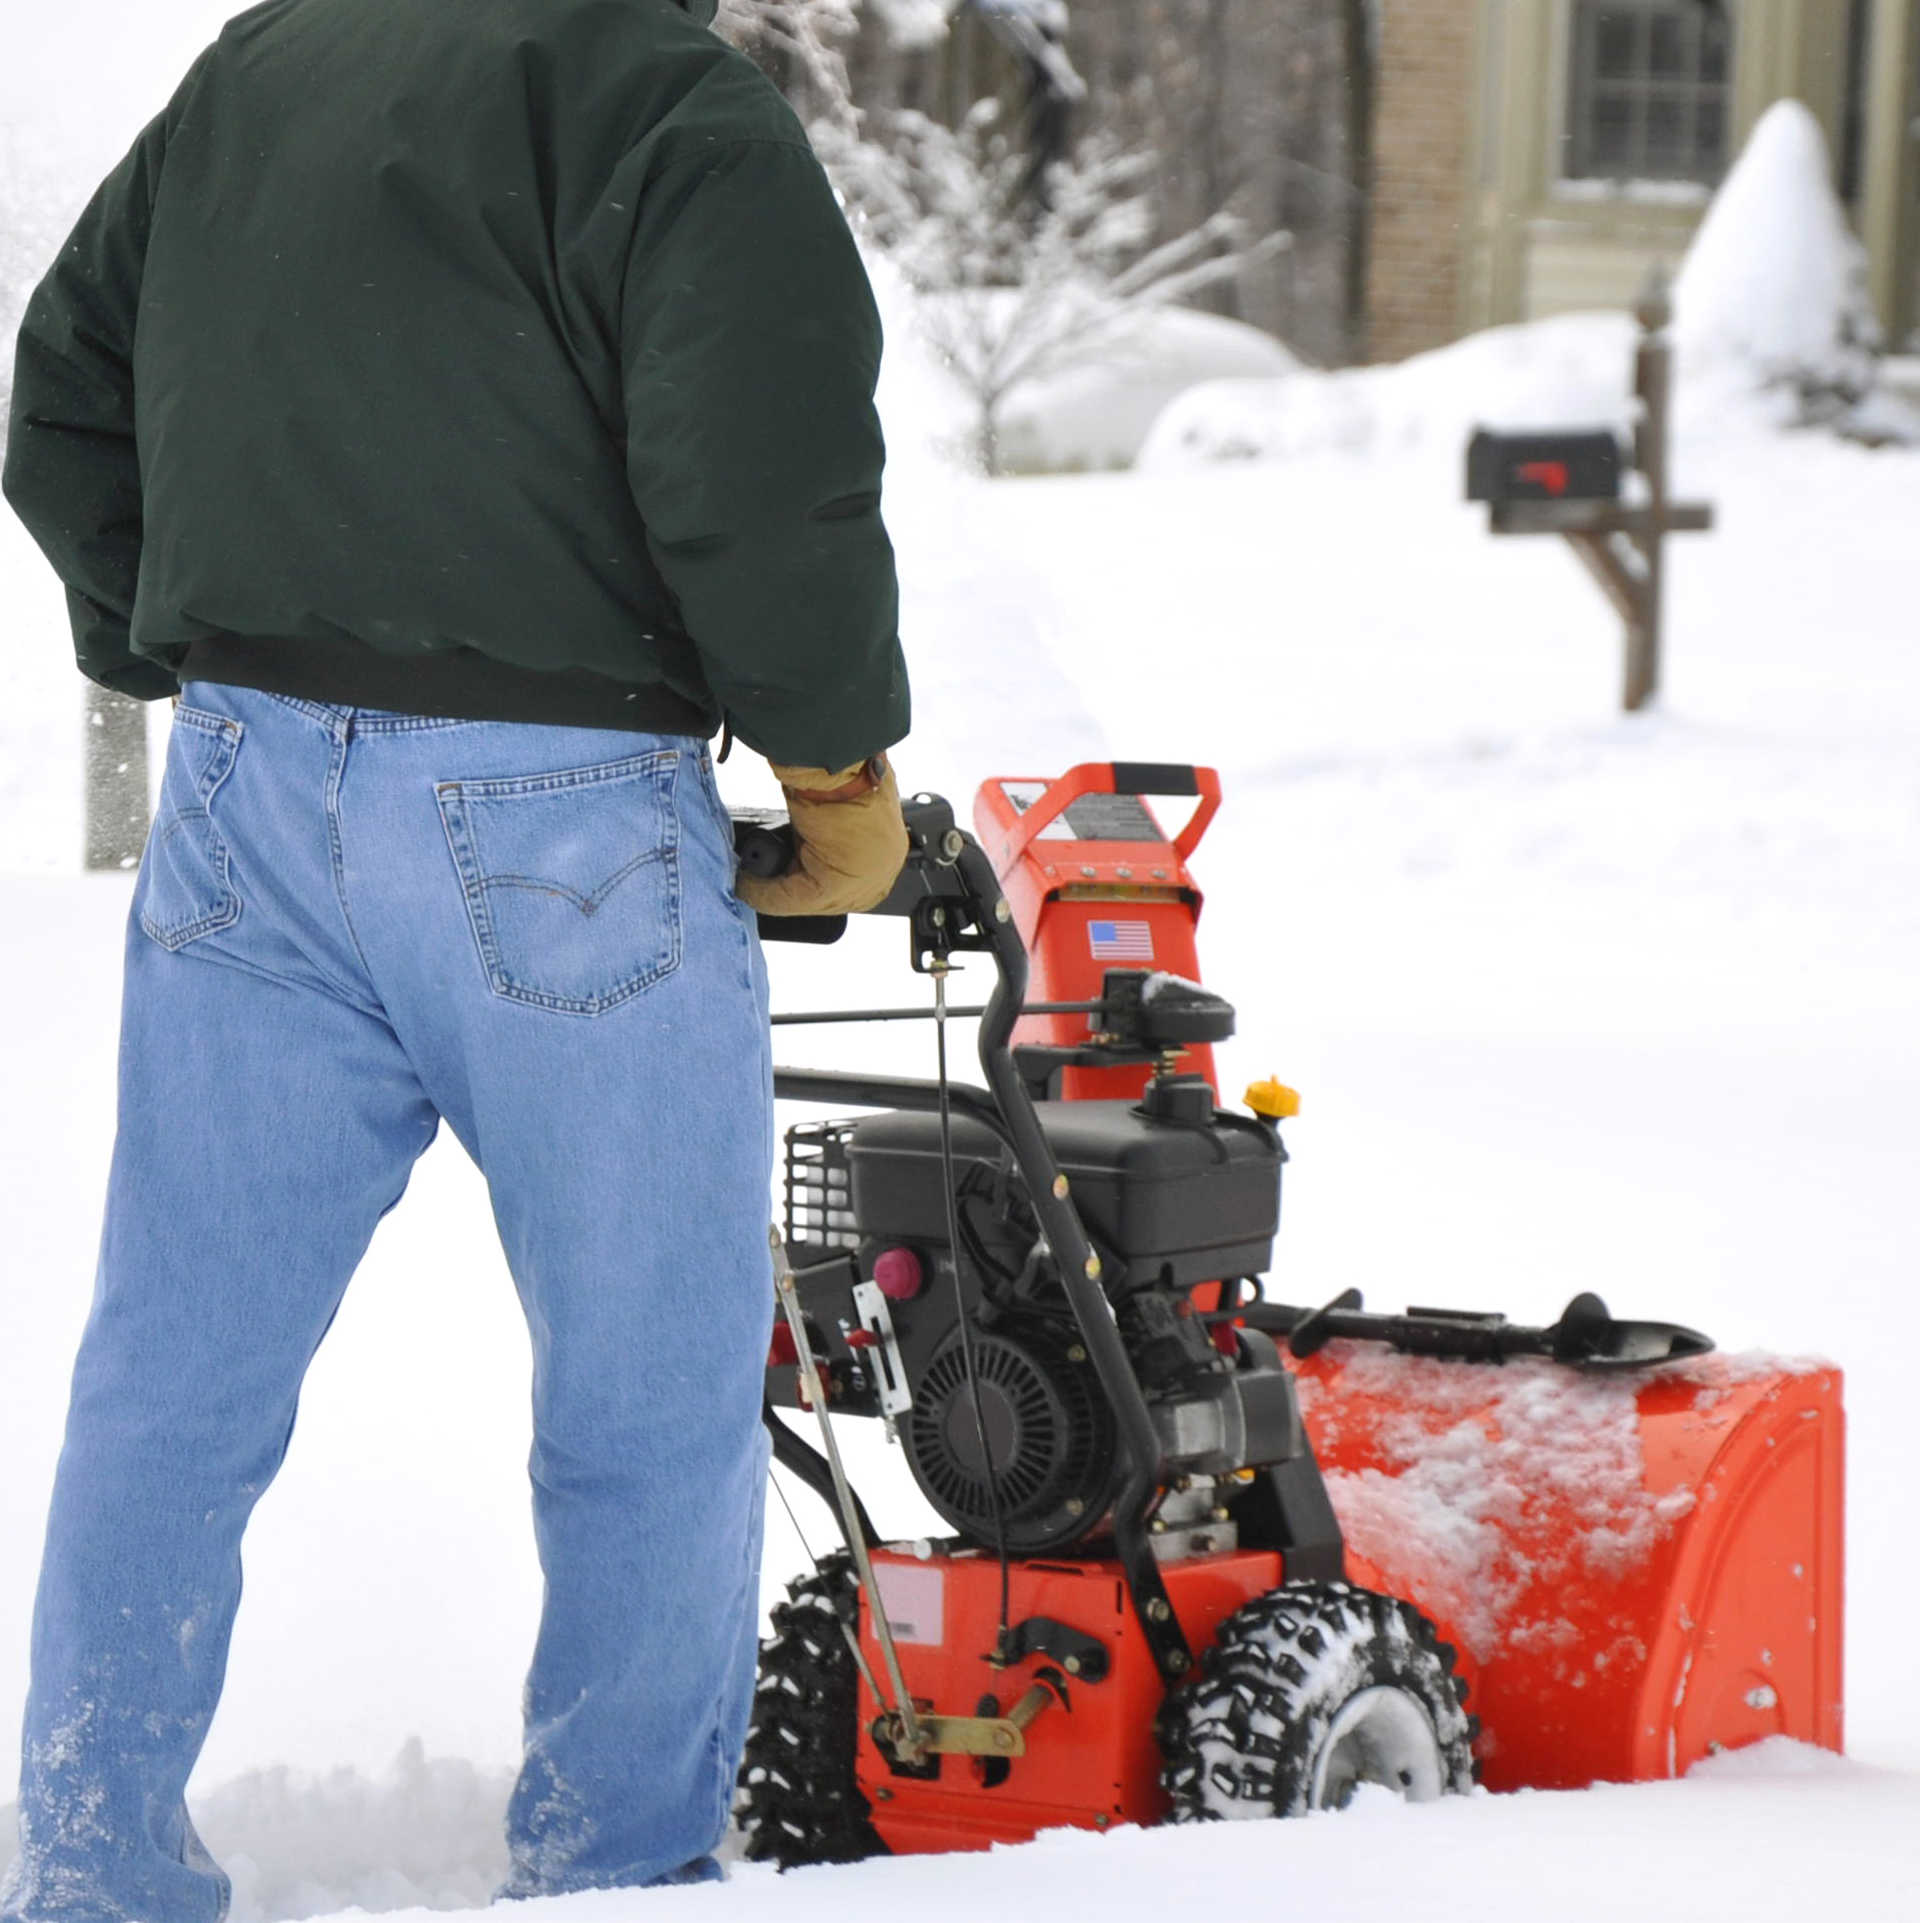 Christians Carts Snow Blower inventory